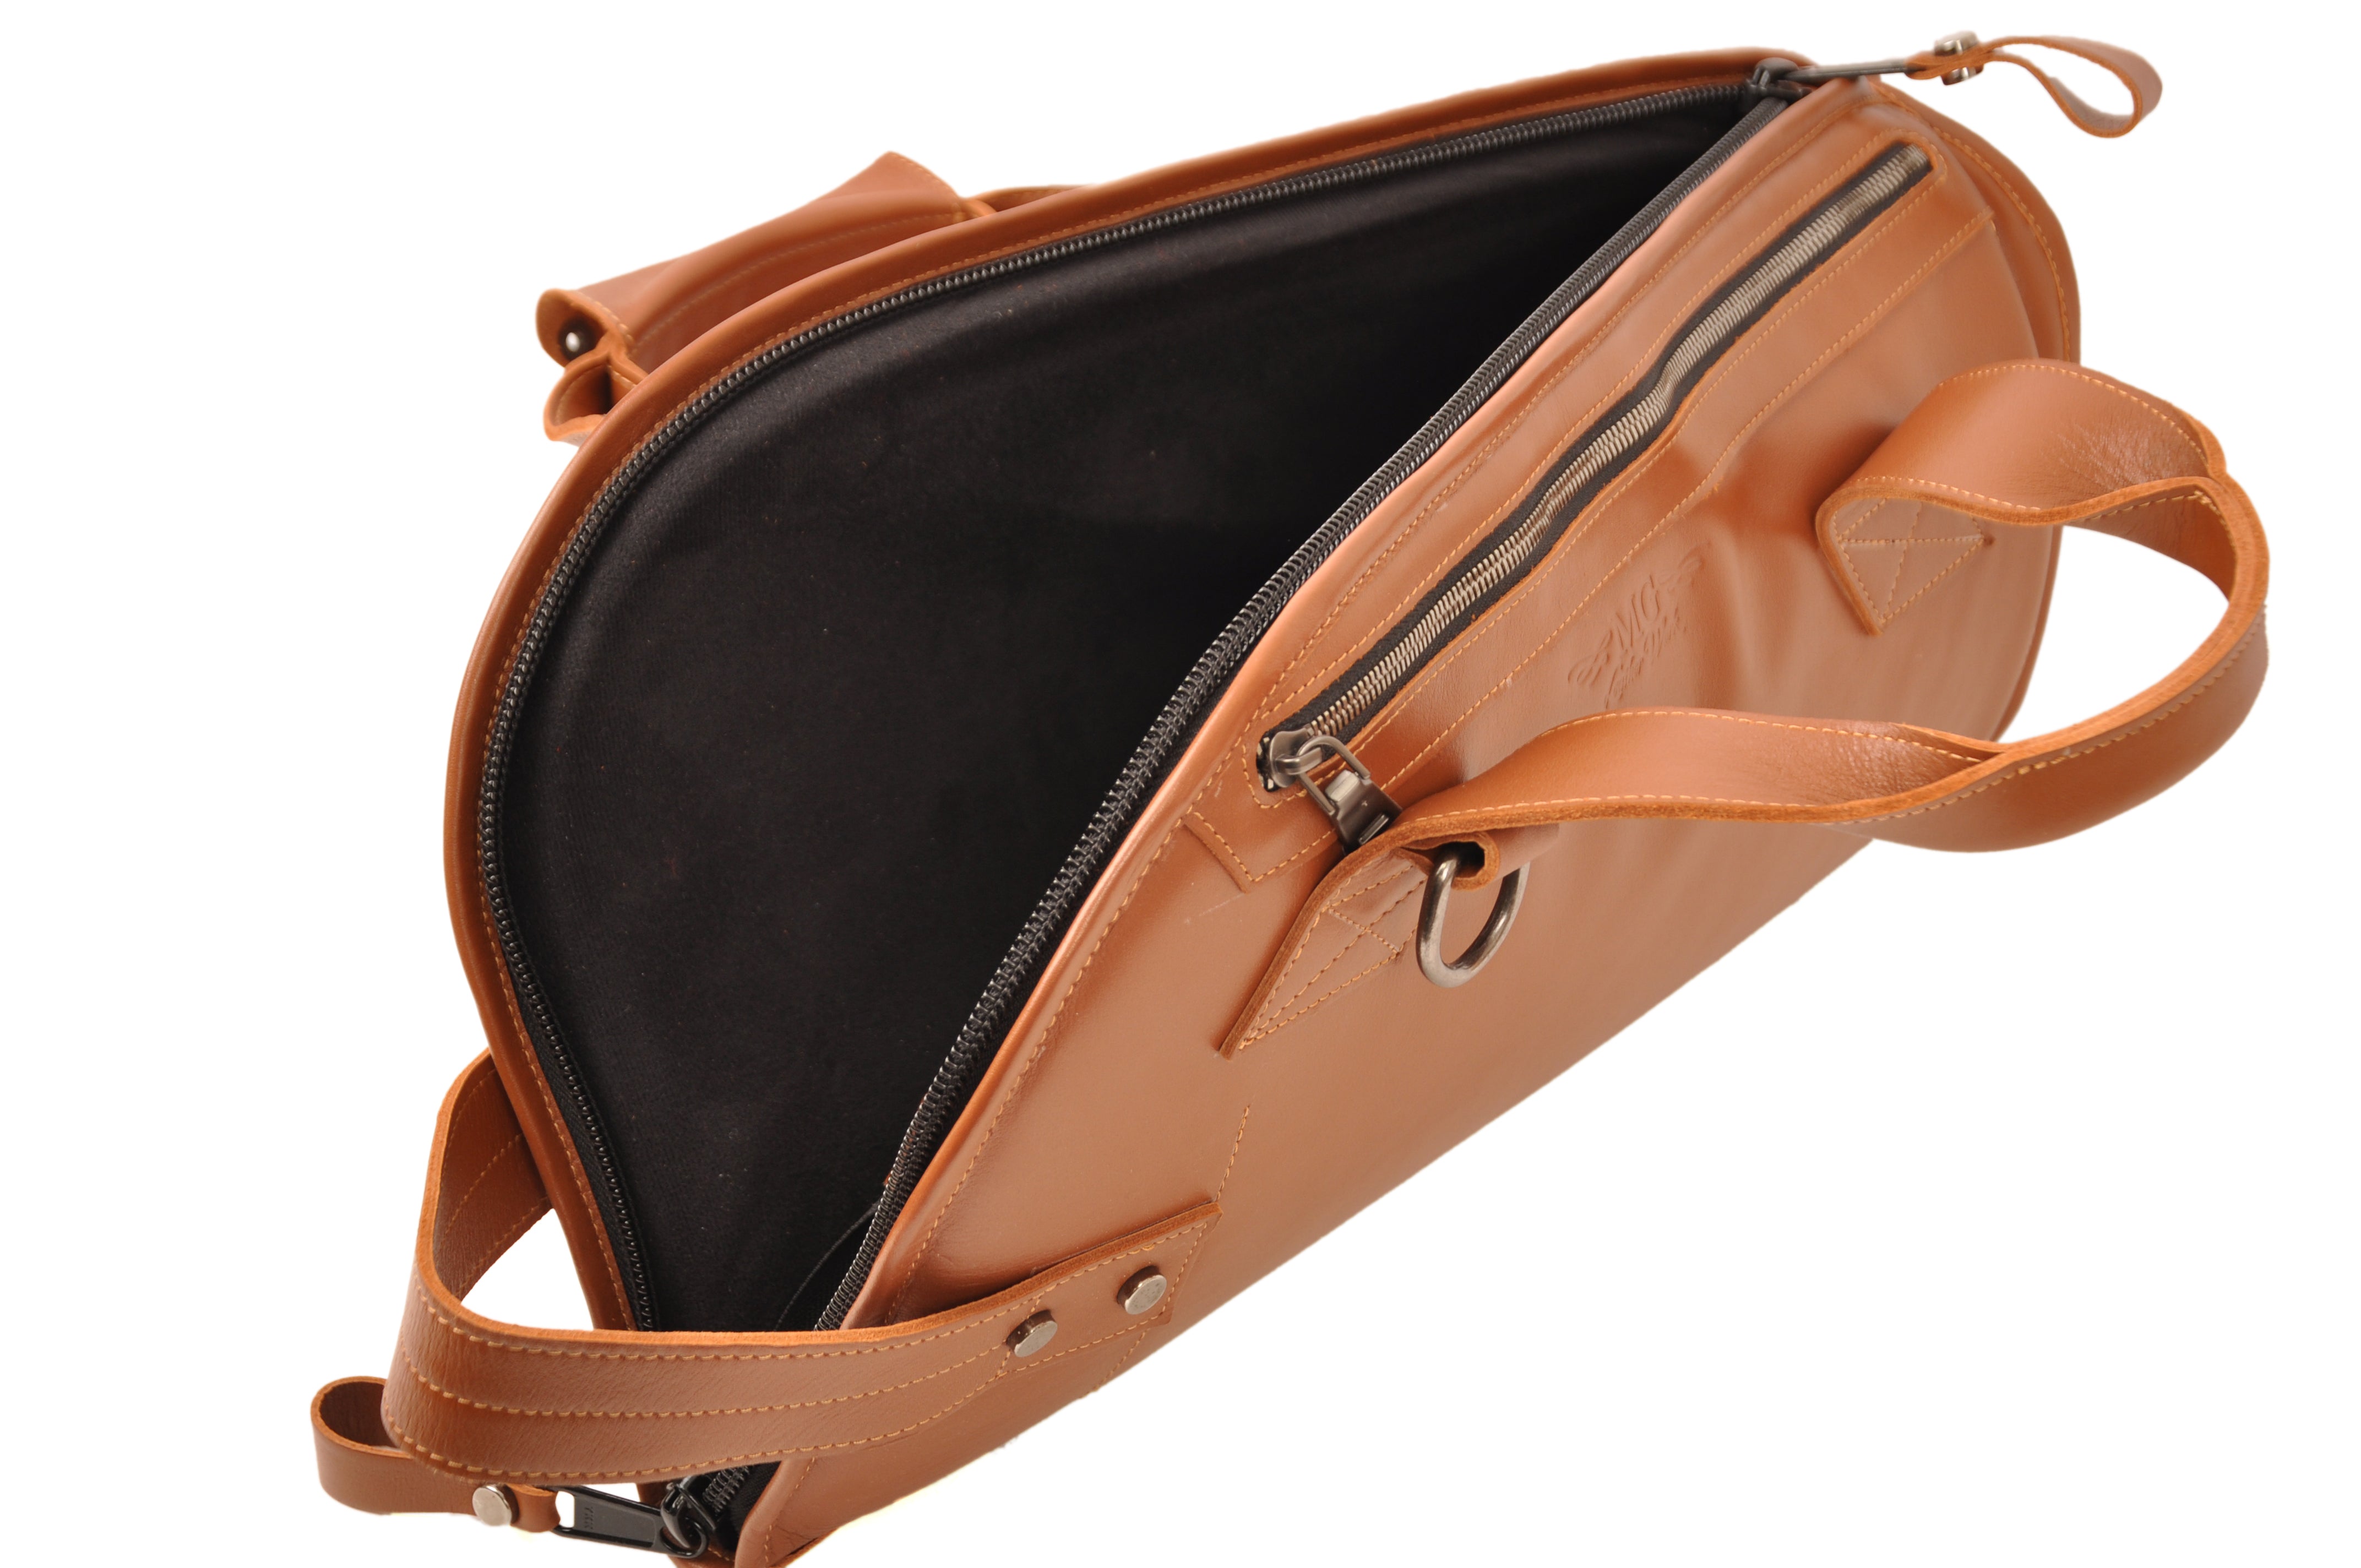 Cornet leather Gig Bag by MG Leather Work